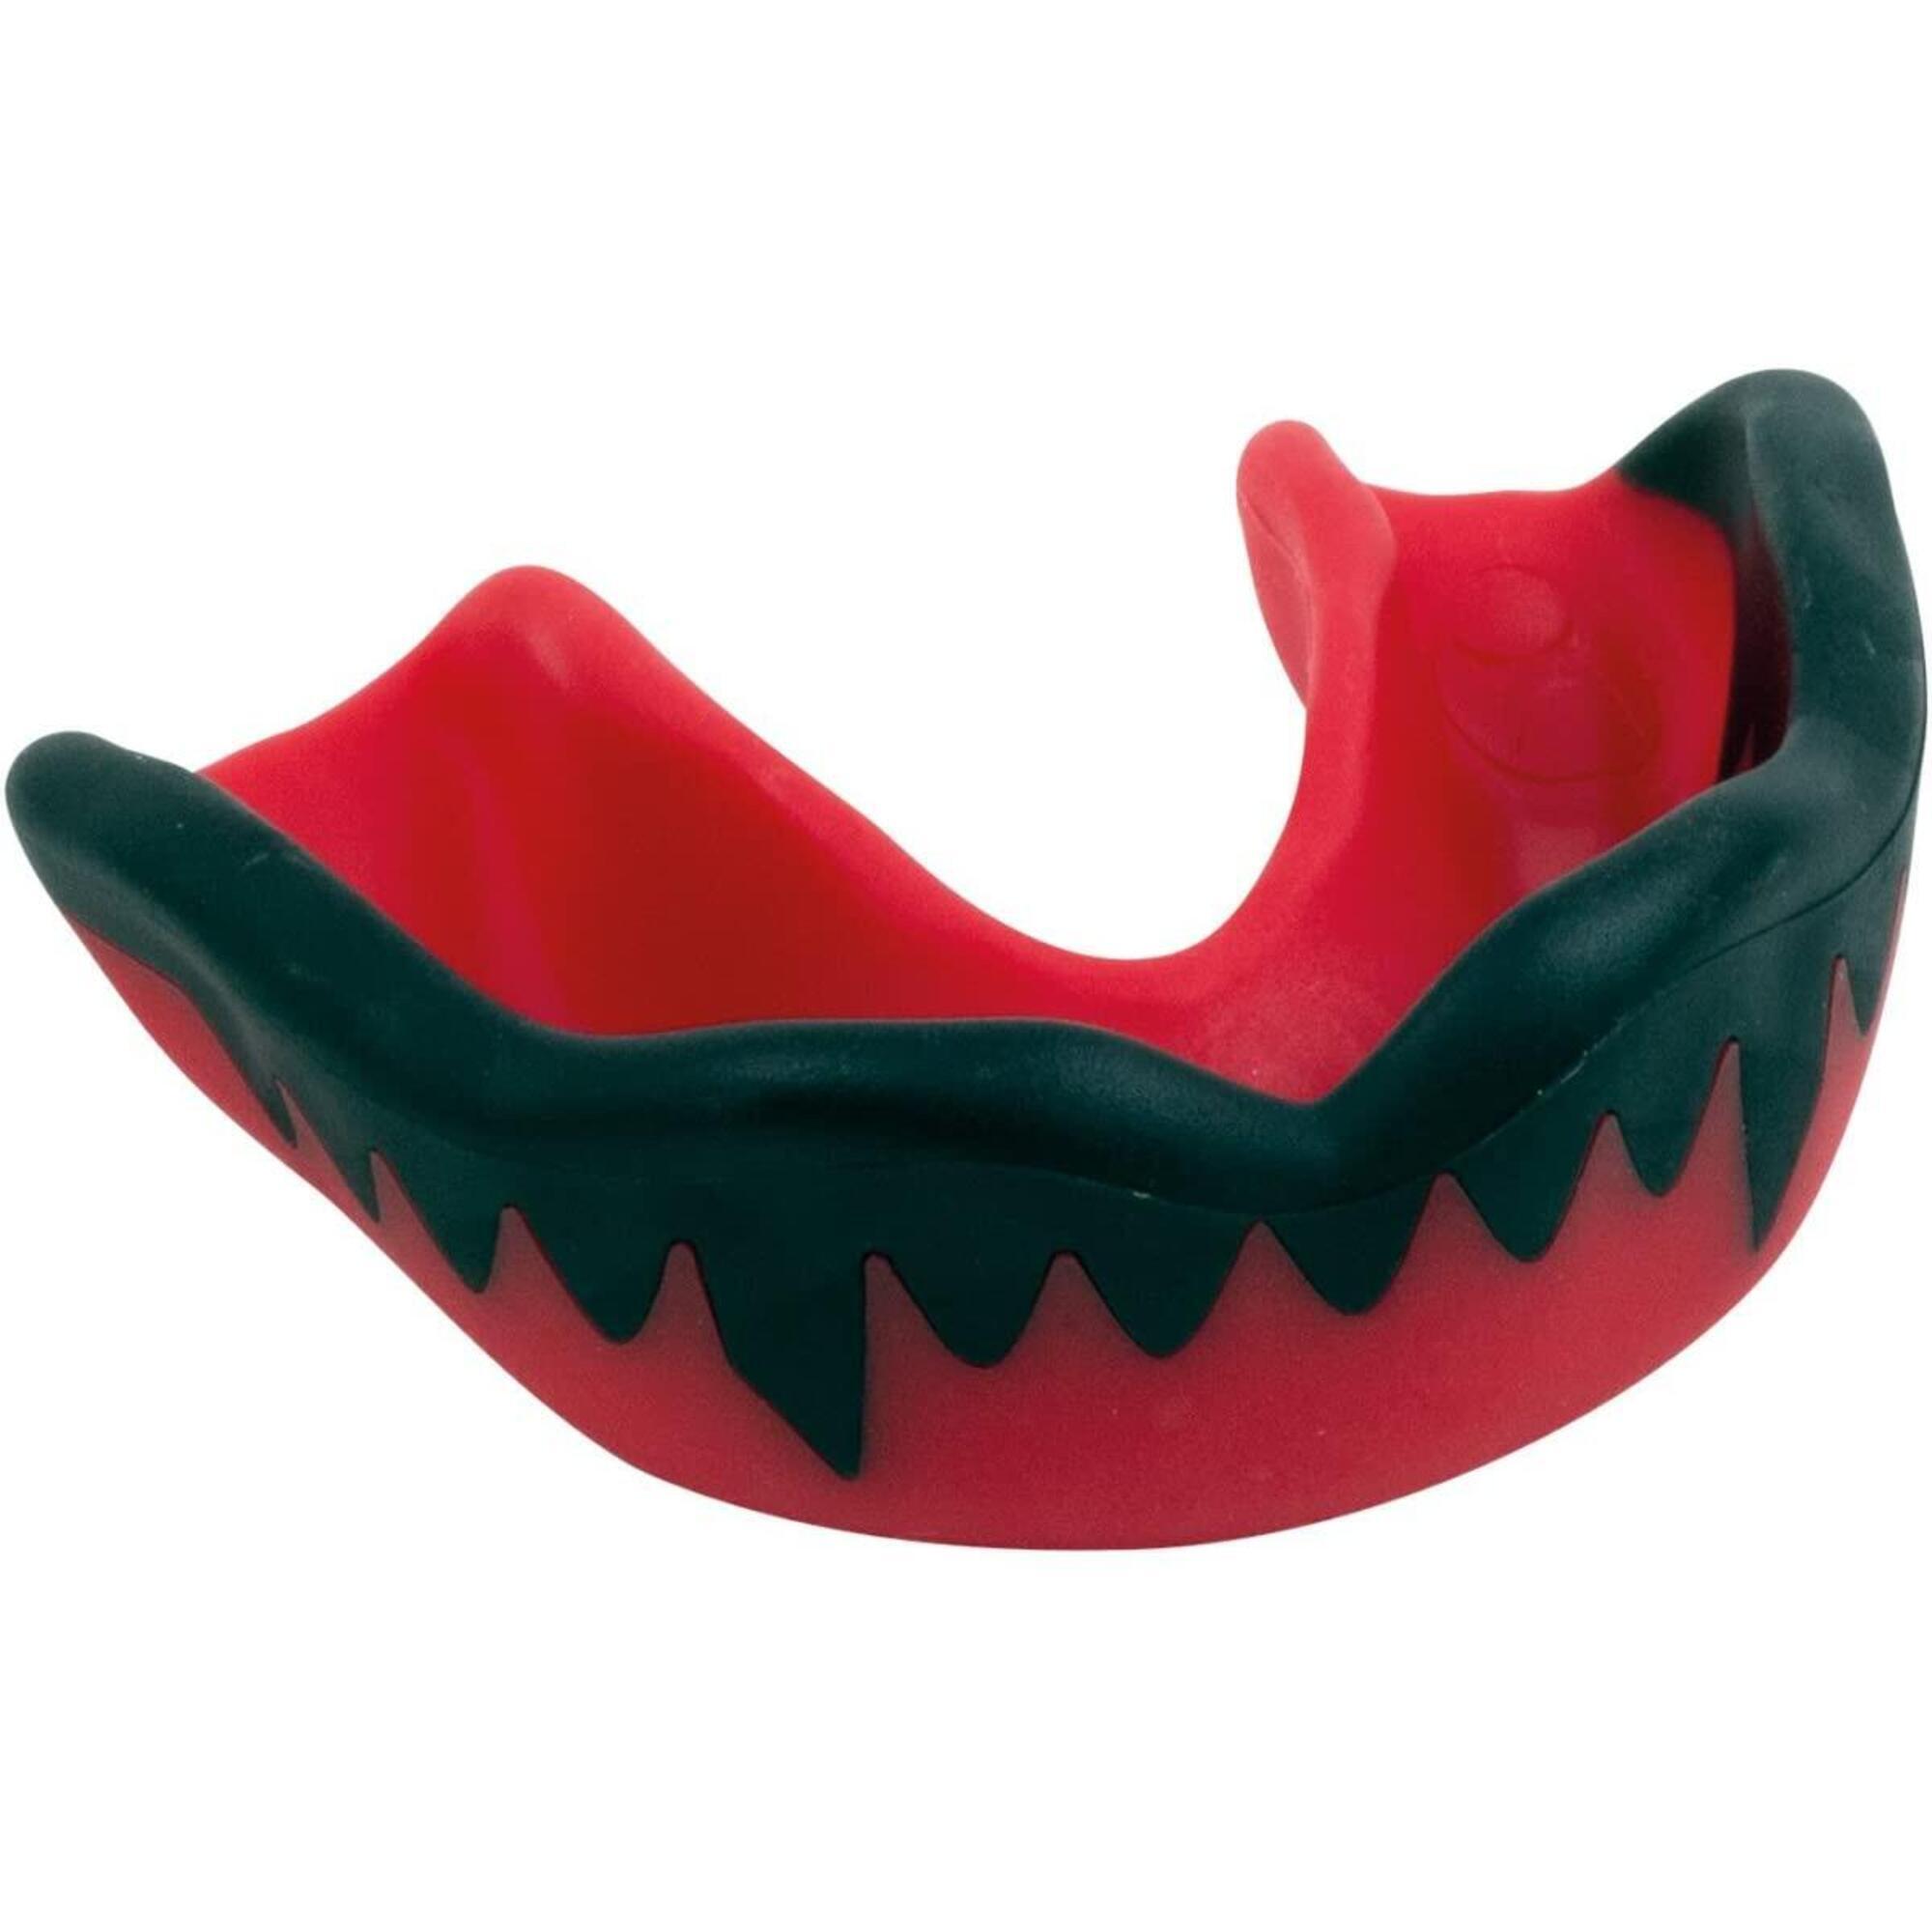 GILBERT Viper Mouthguard - Red / Black - Adult